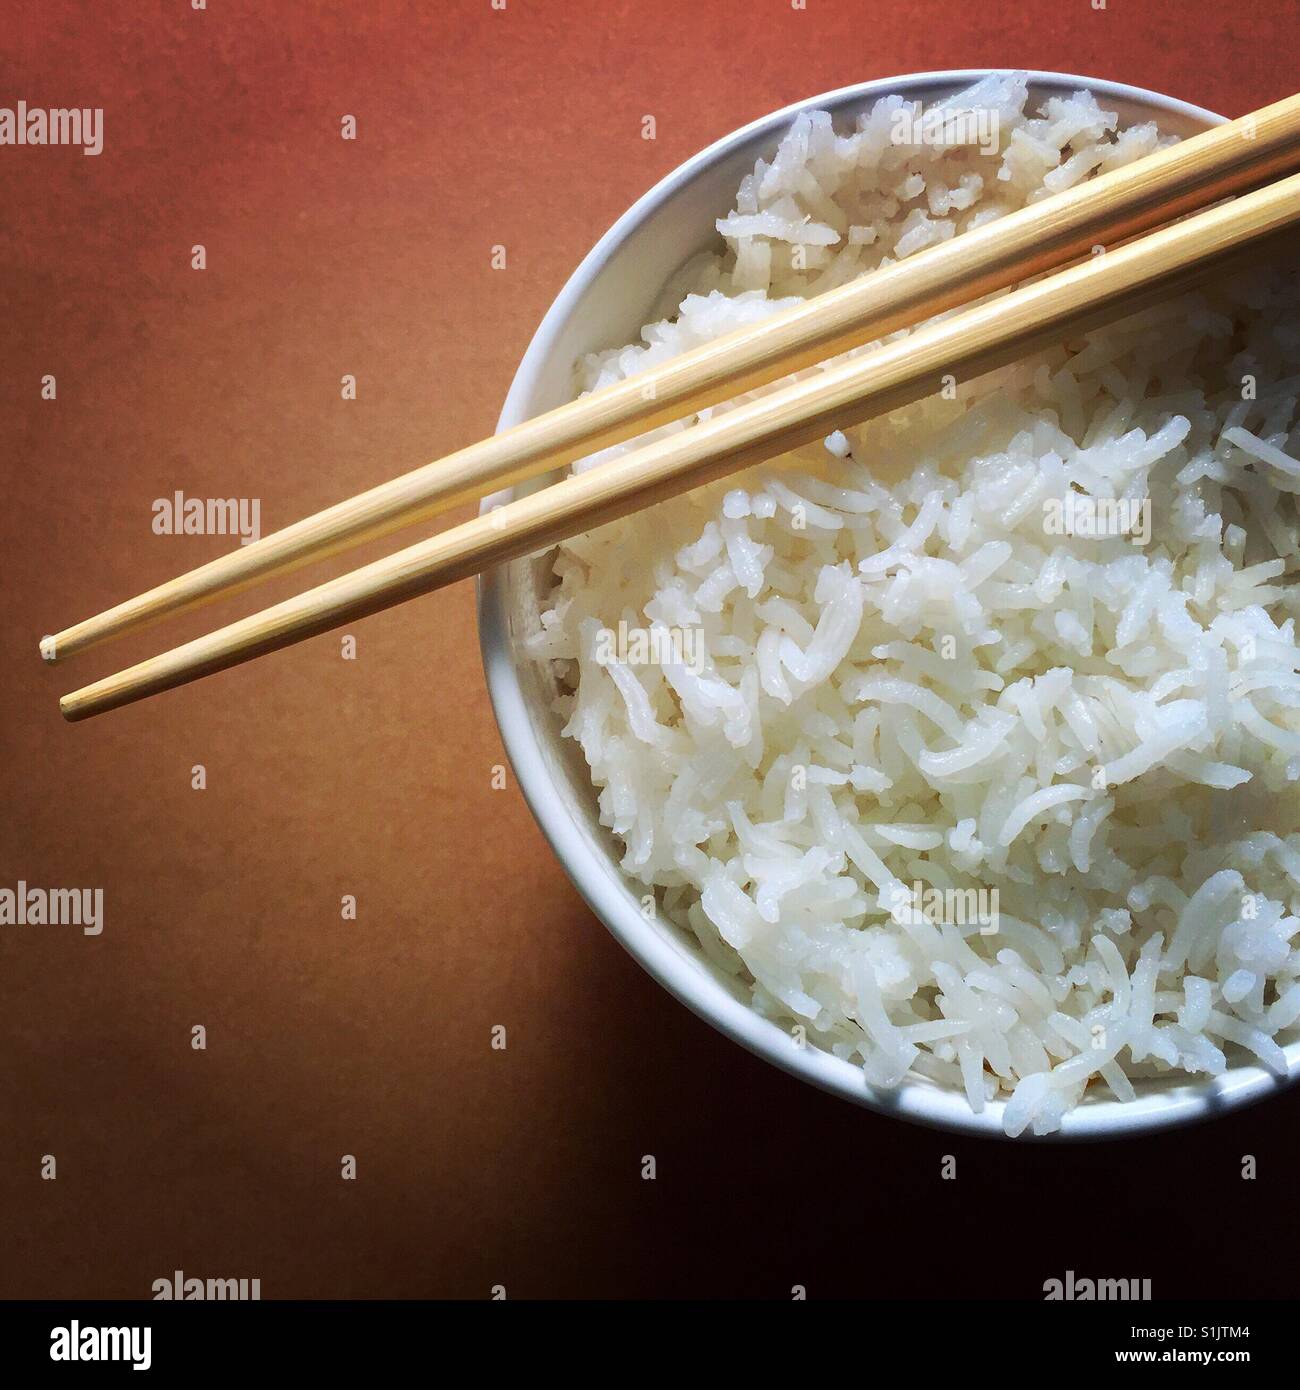 Chopsticks resting on a small bowl of plain white rice Stock Photo